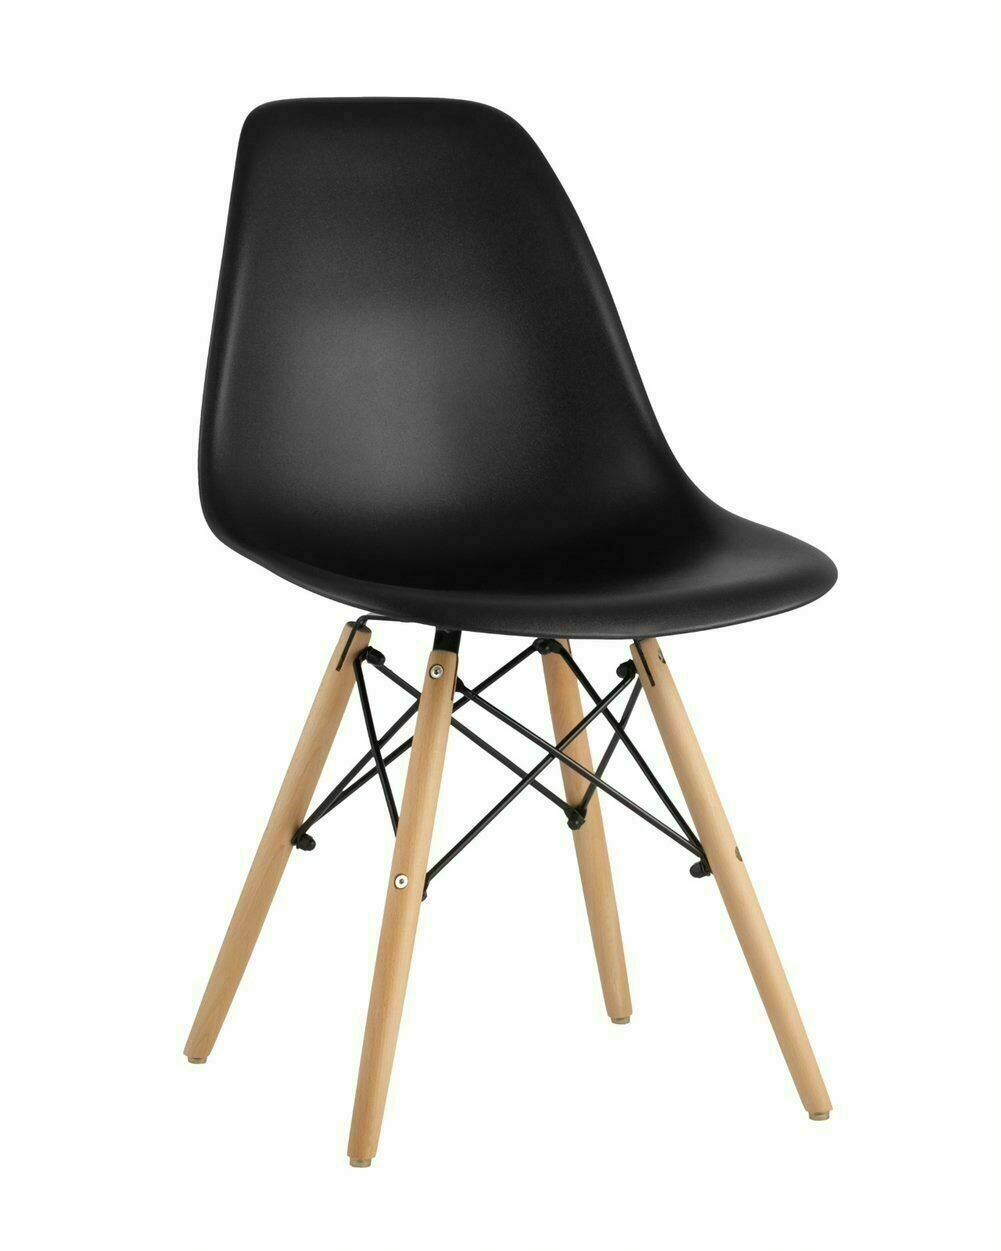  STOOL GROUP Style DSW (4 .) 